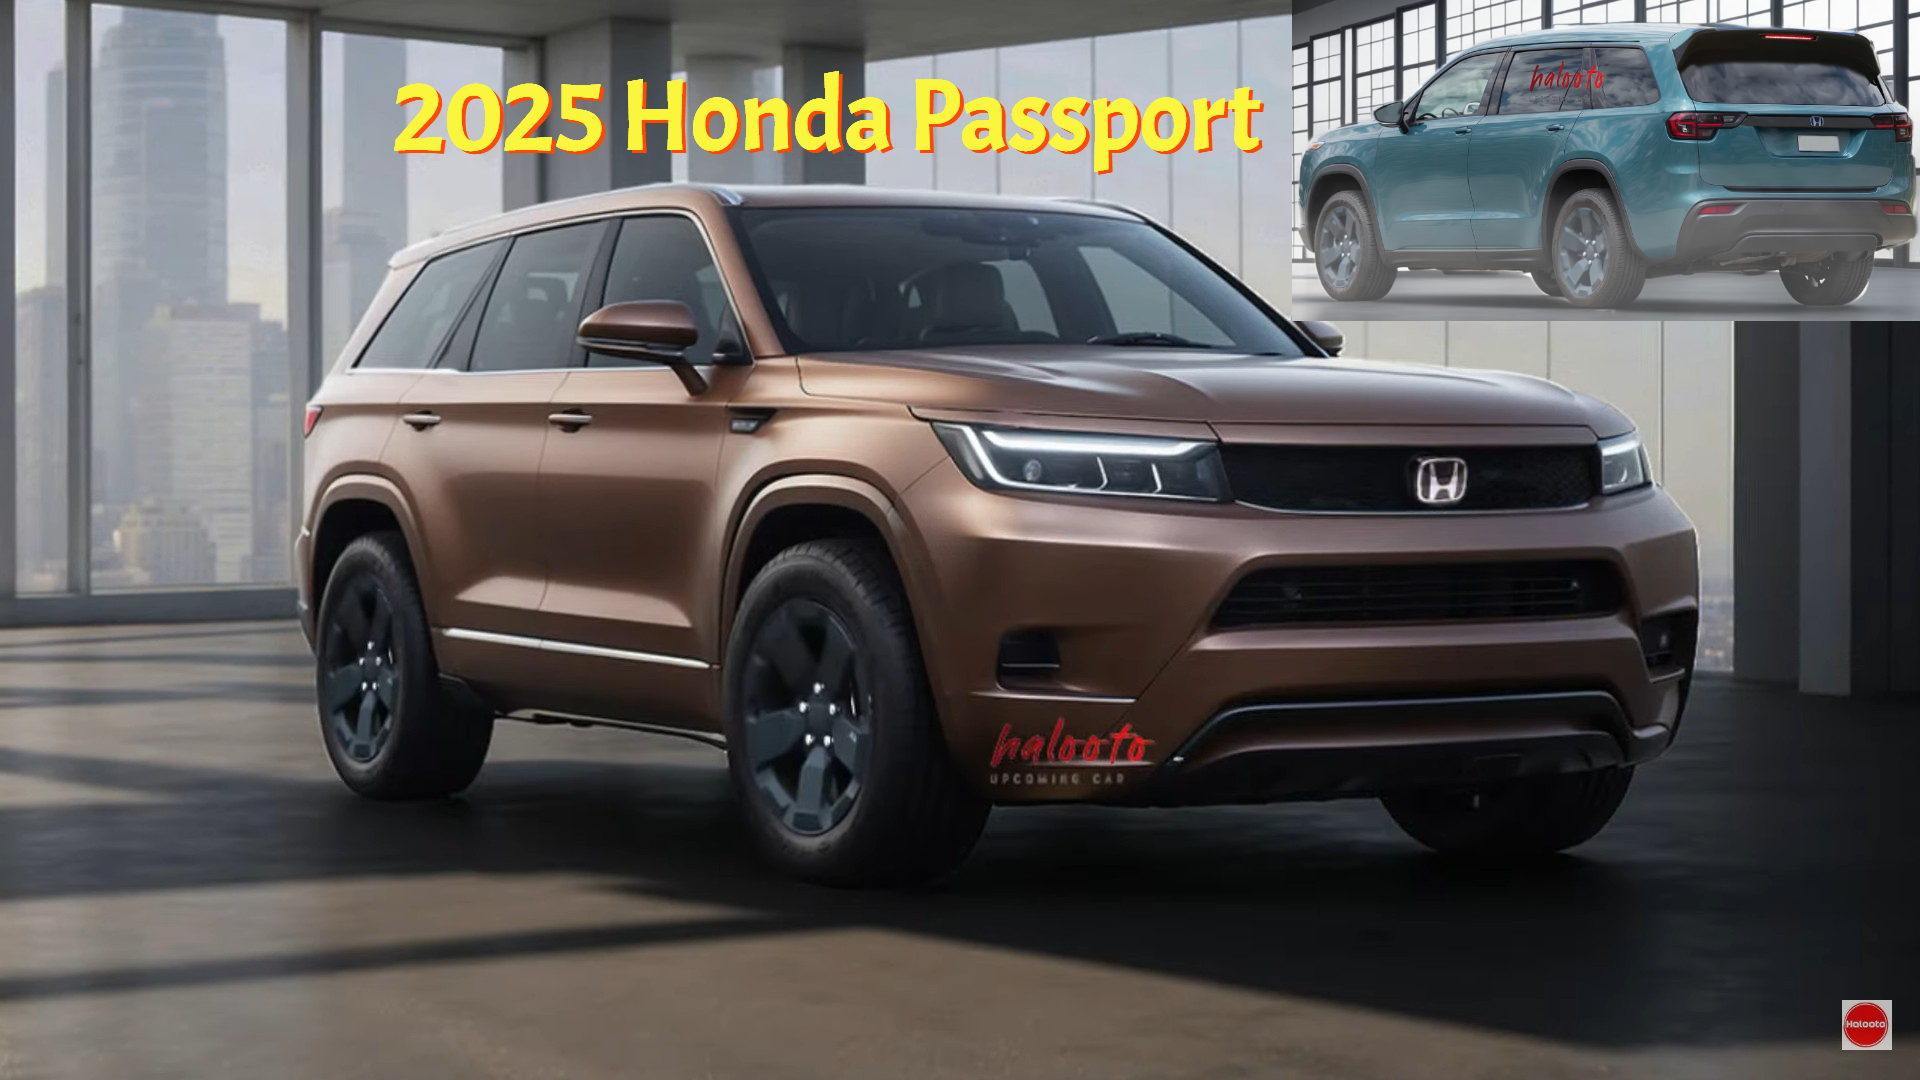 Fourth-Gen 2025 Honda Passport Gets Imagined With a Boxier Yet Stylish